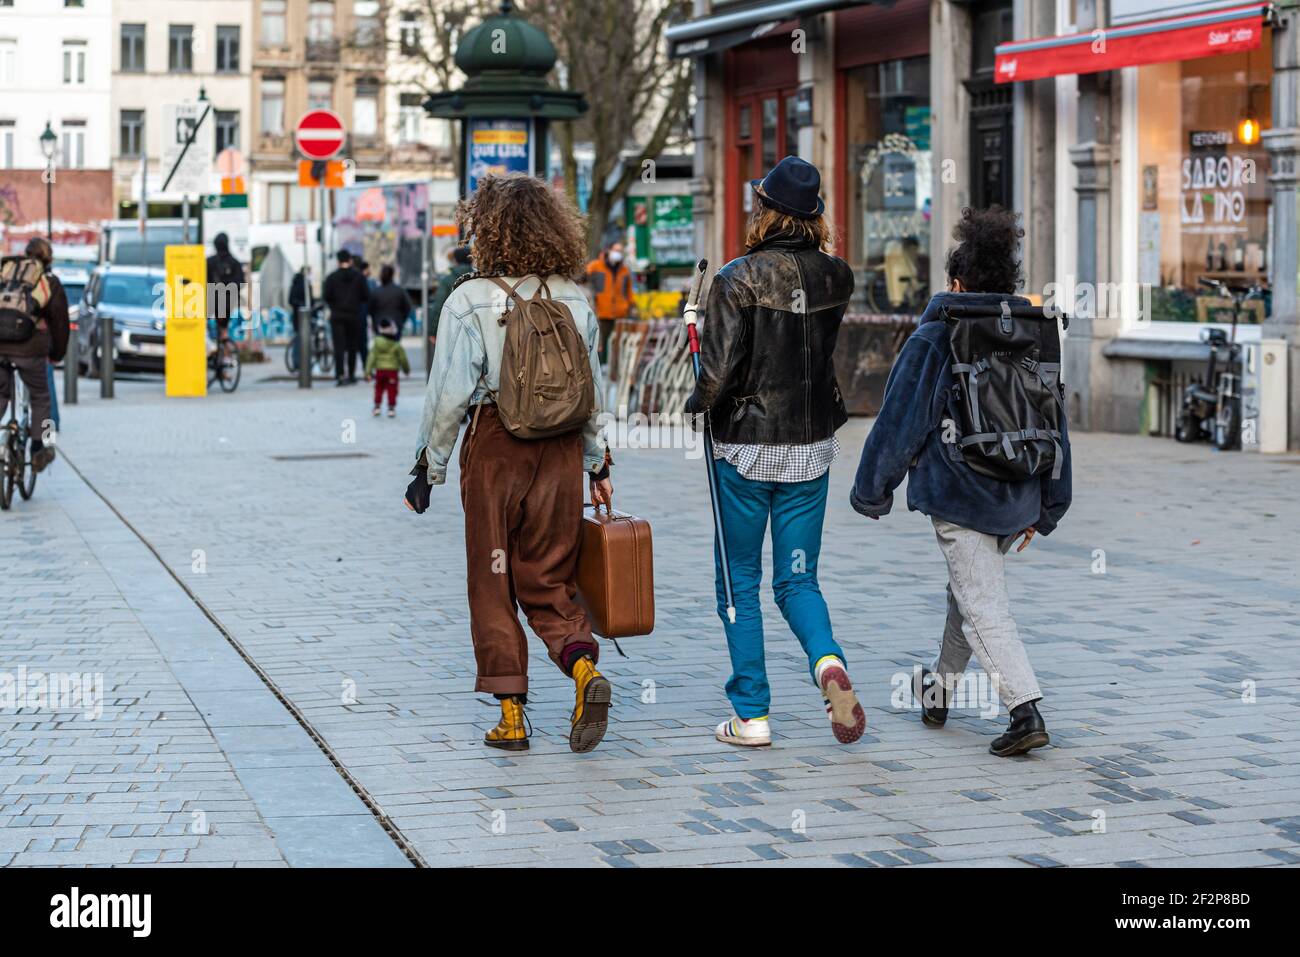 Saint- Gilles, Brussels Capital Region - Belgium: 02 26 2021: Fashionable girls going out at the Parvis market square Stock Photo